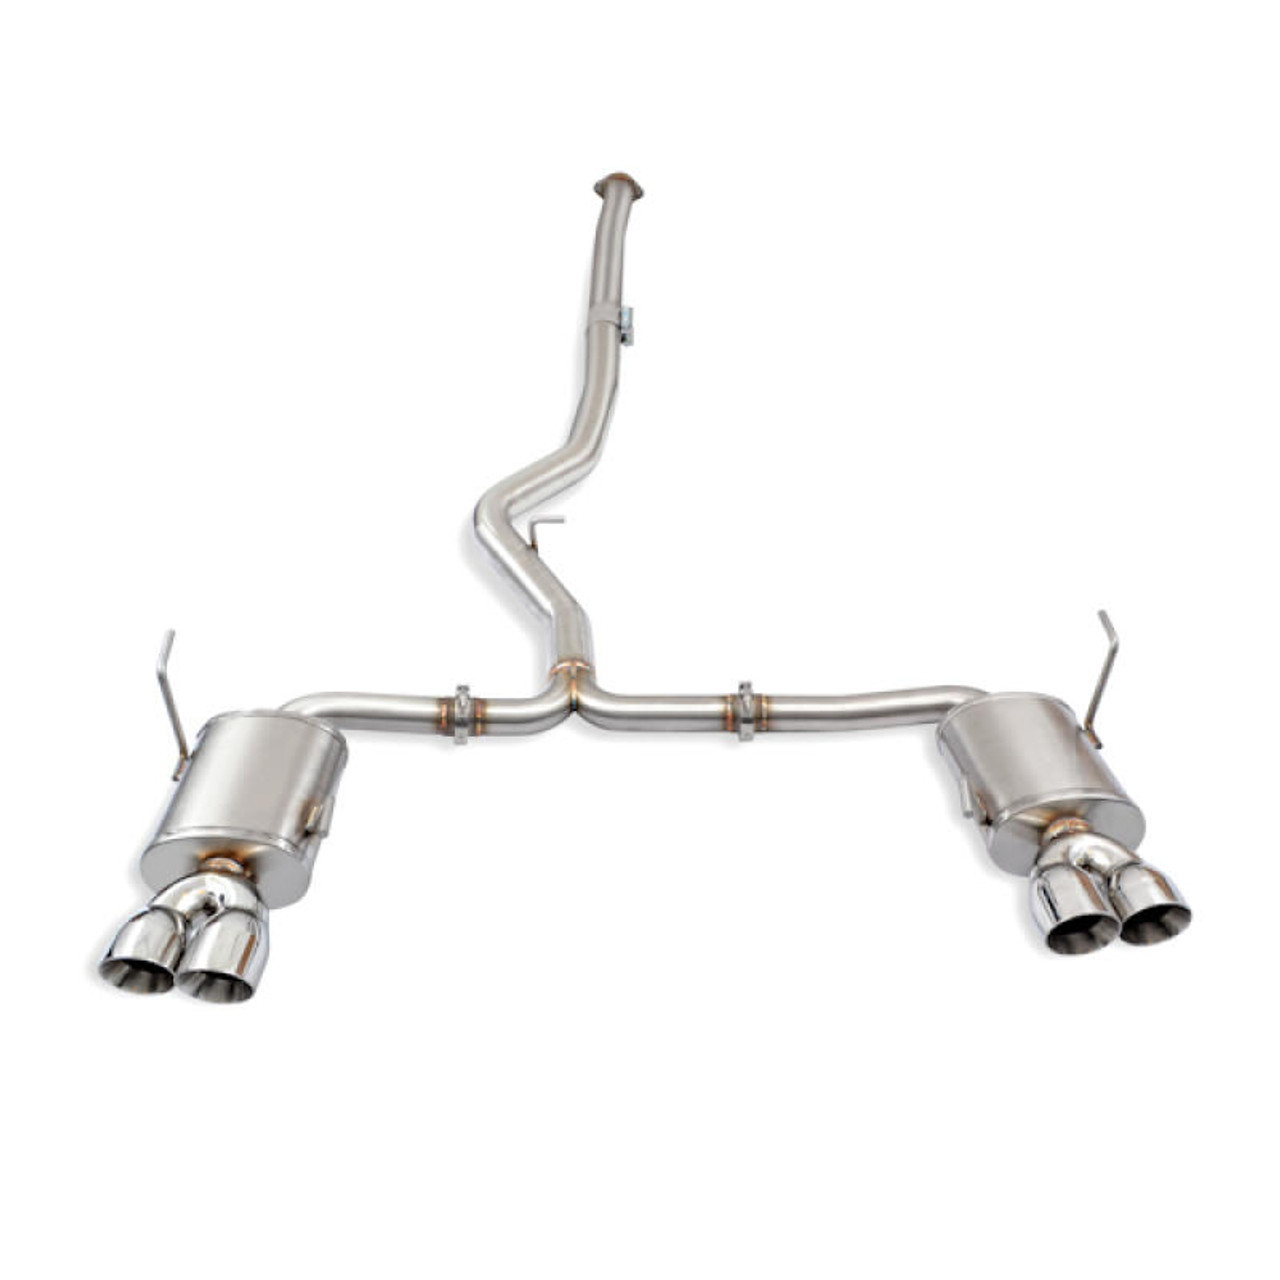 Mishimoto 2015 Subaru WRX 3in Stainless Steel Cat-Back Exhaust - MMEXH-WRX-15